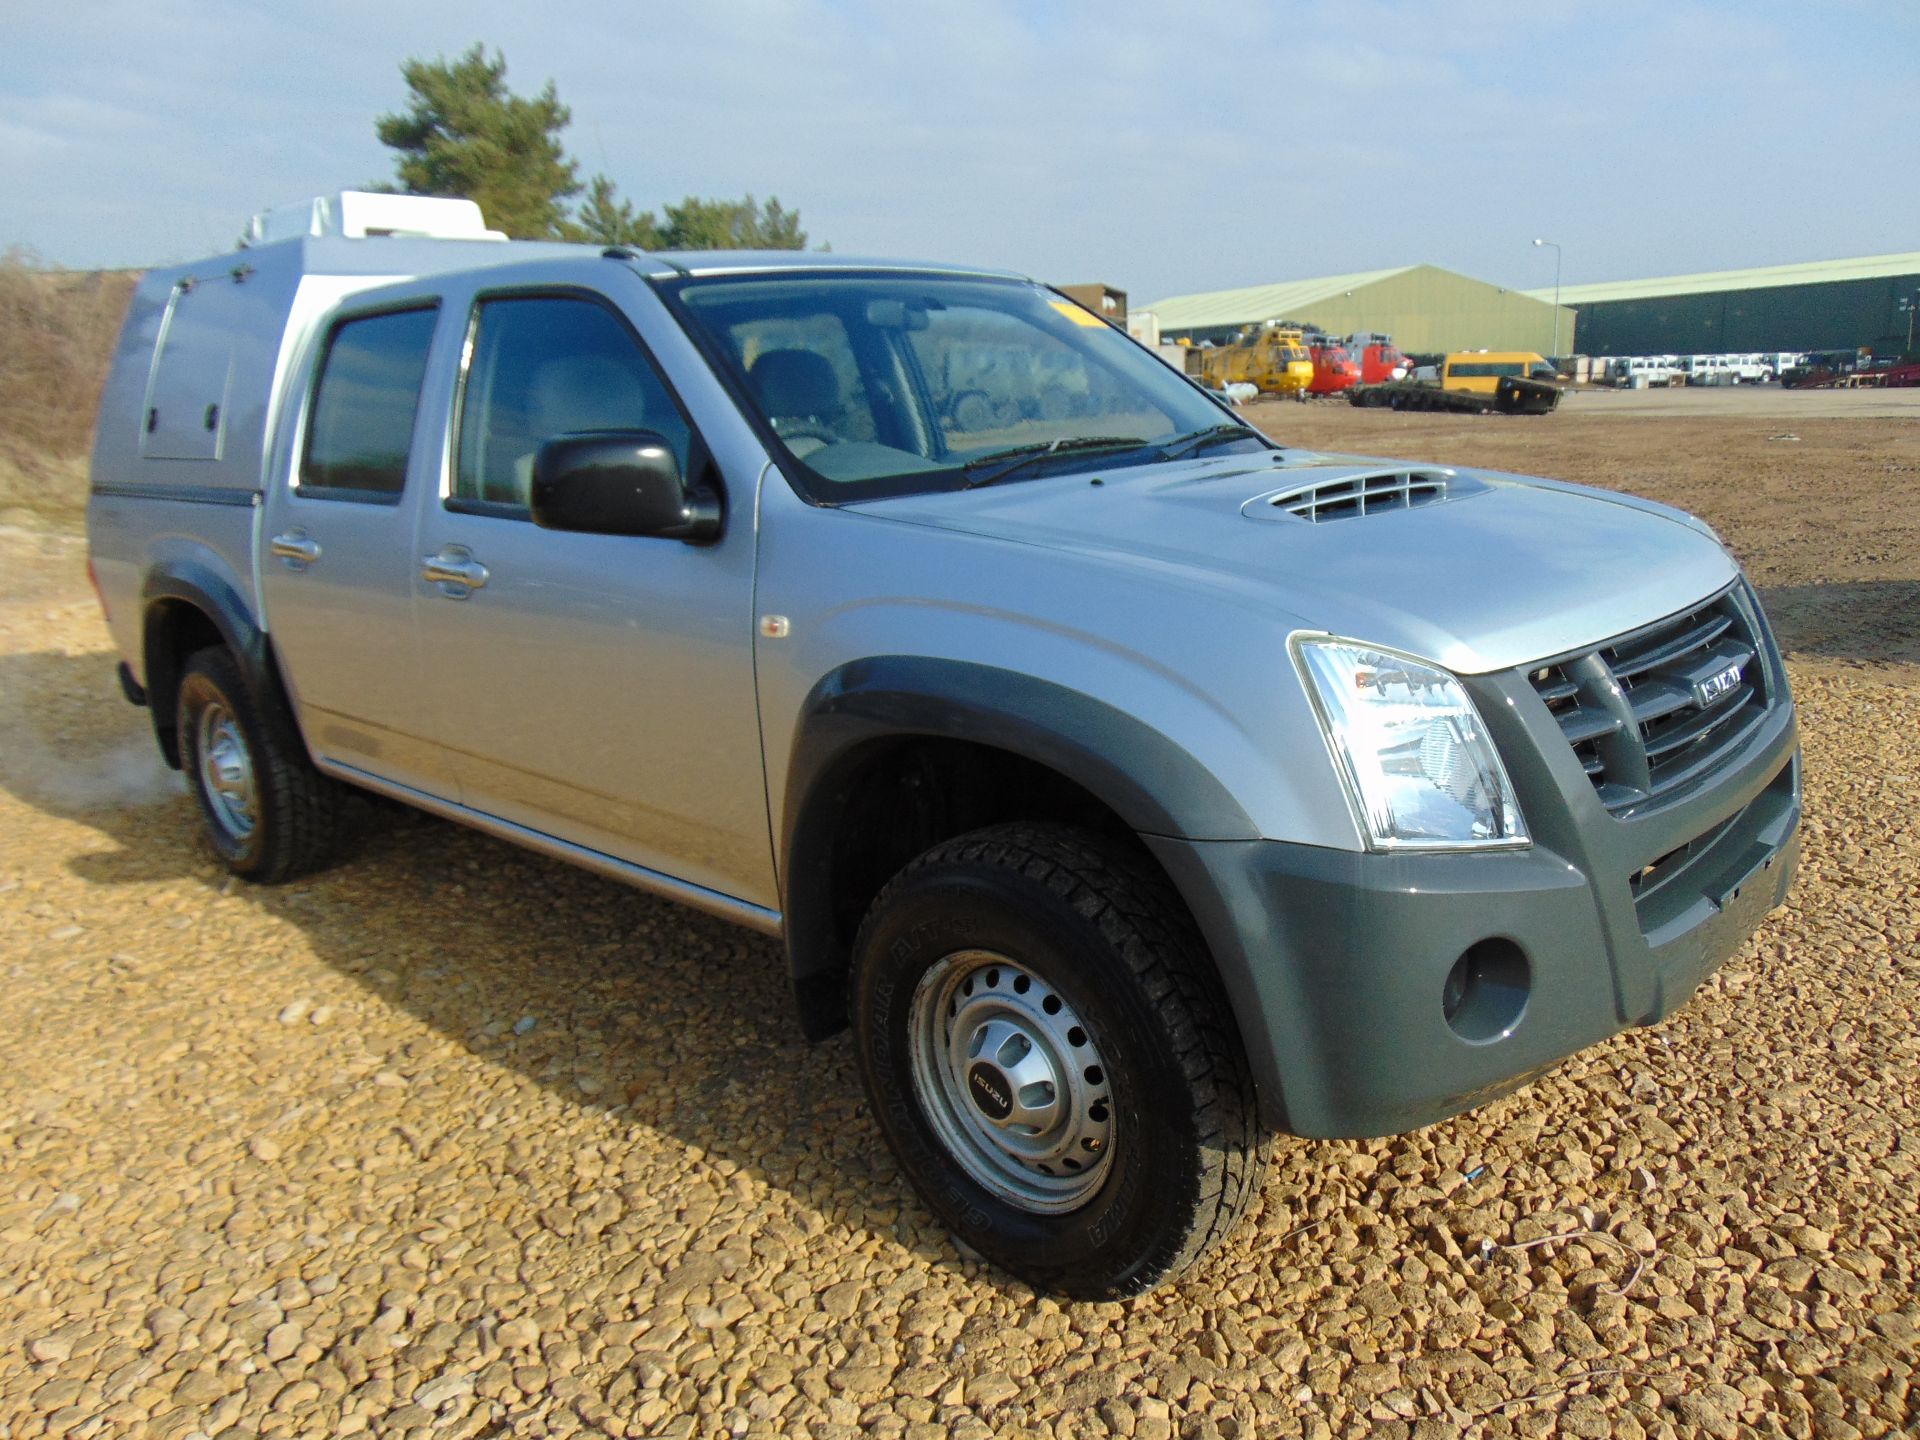 Isuzu D-Max Double Cab 2.5 Turbo Diesel 4 x 4 complete with twin rear dog cage fitted